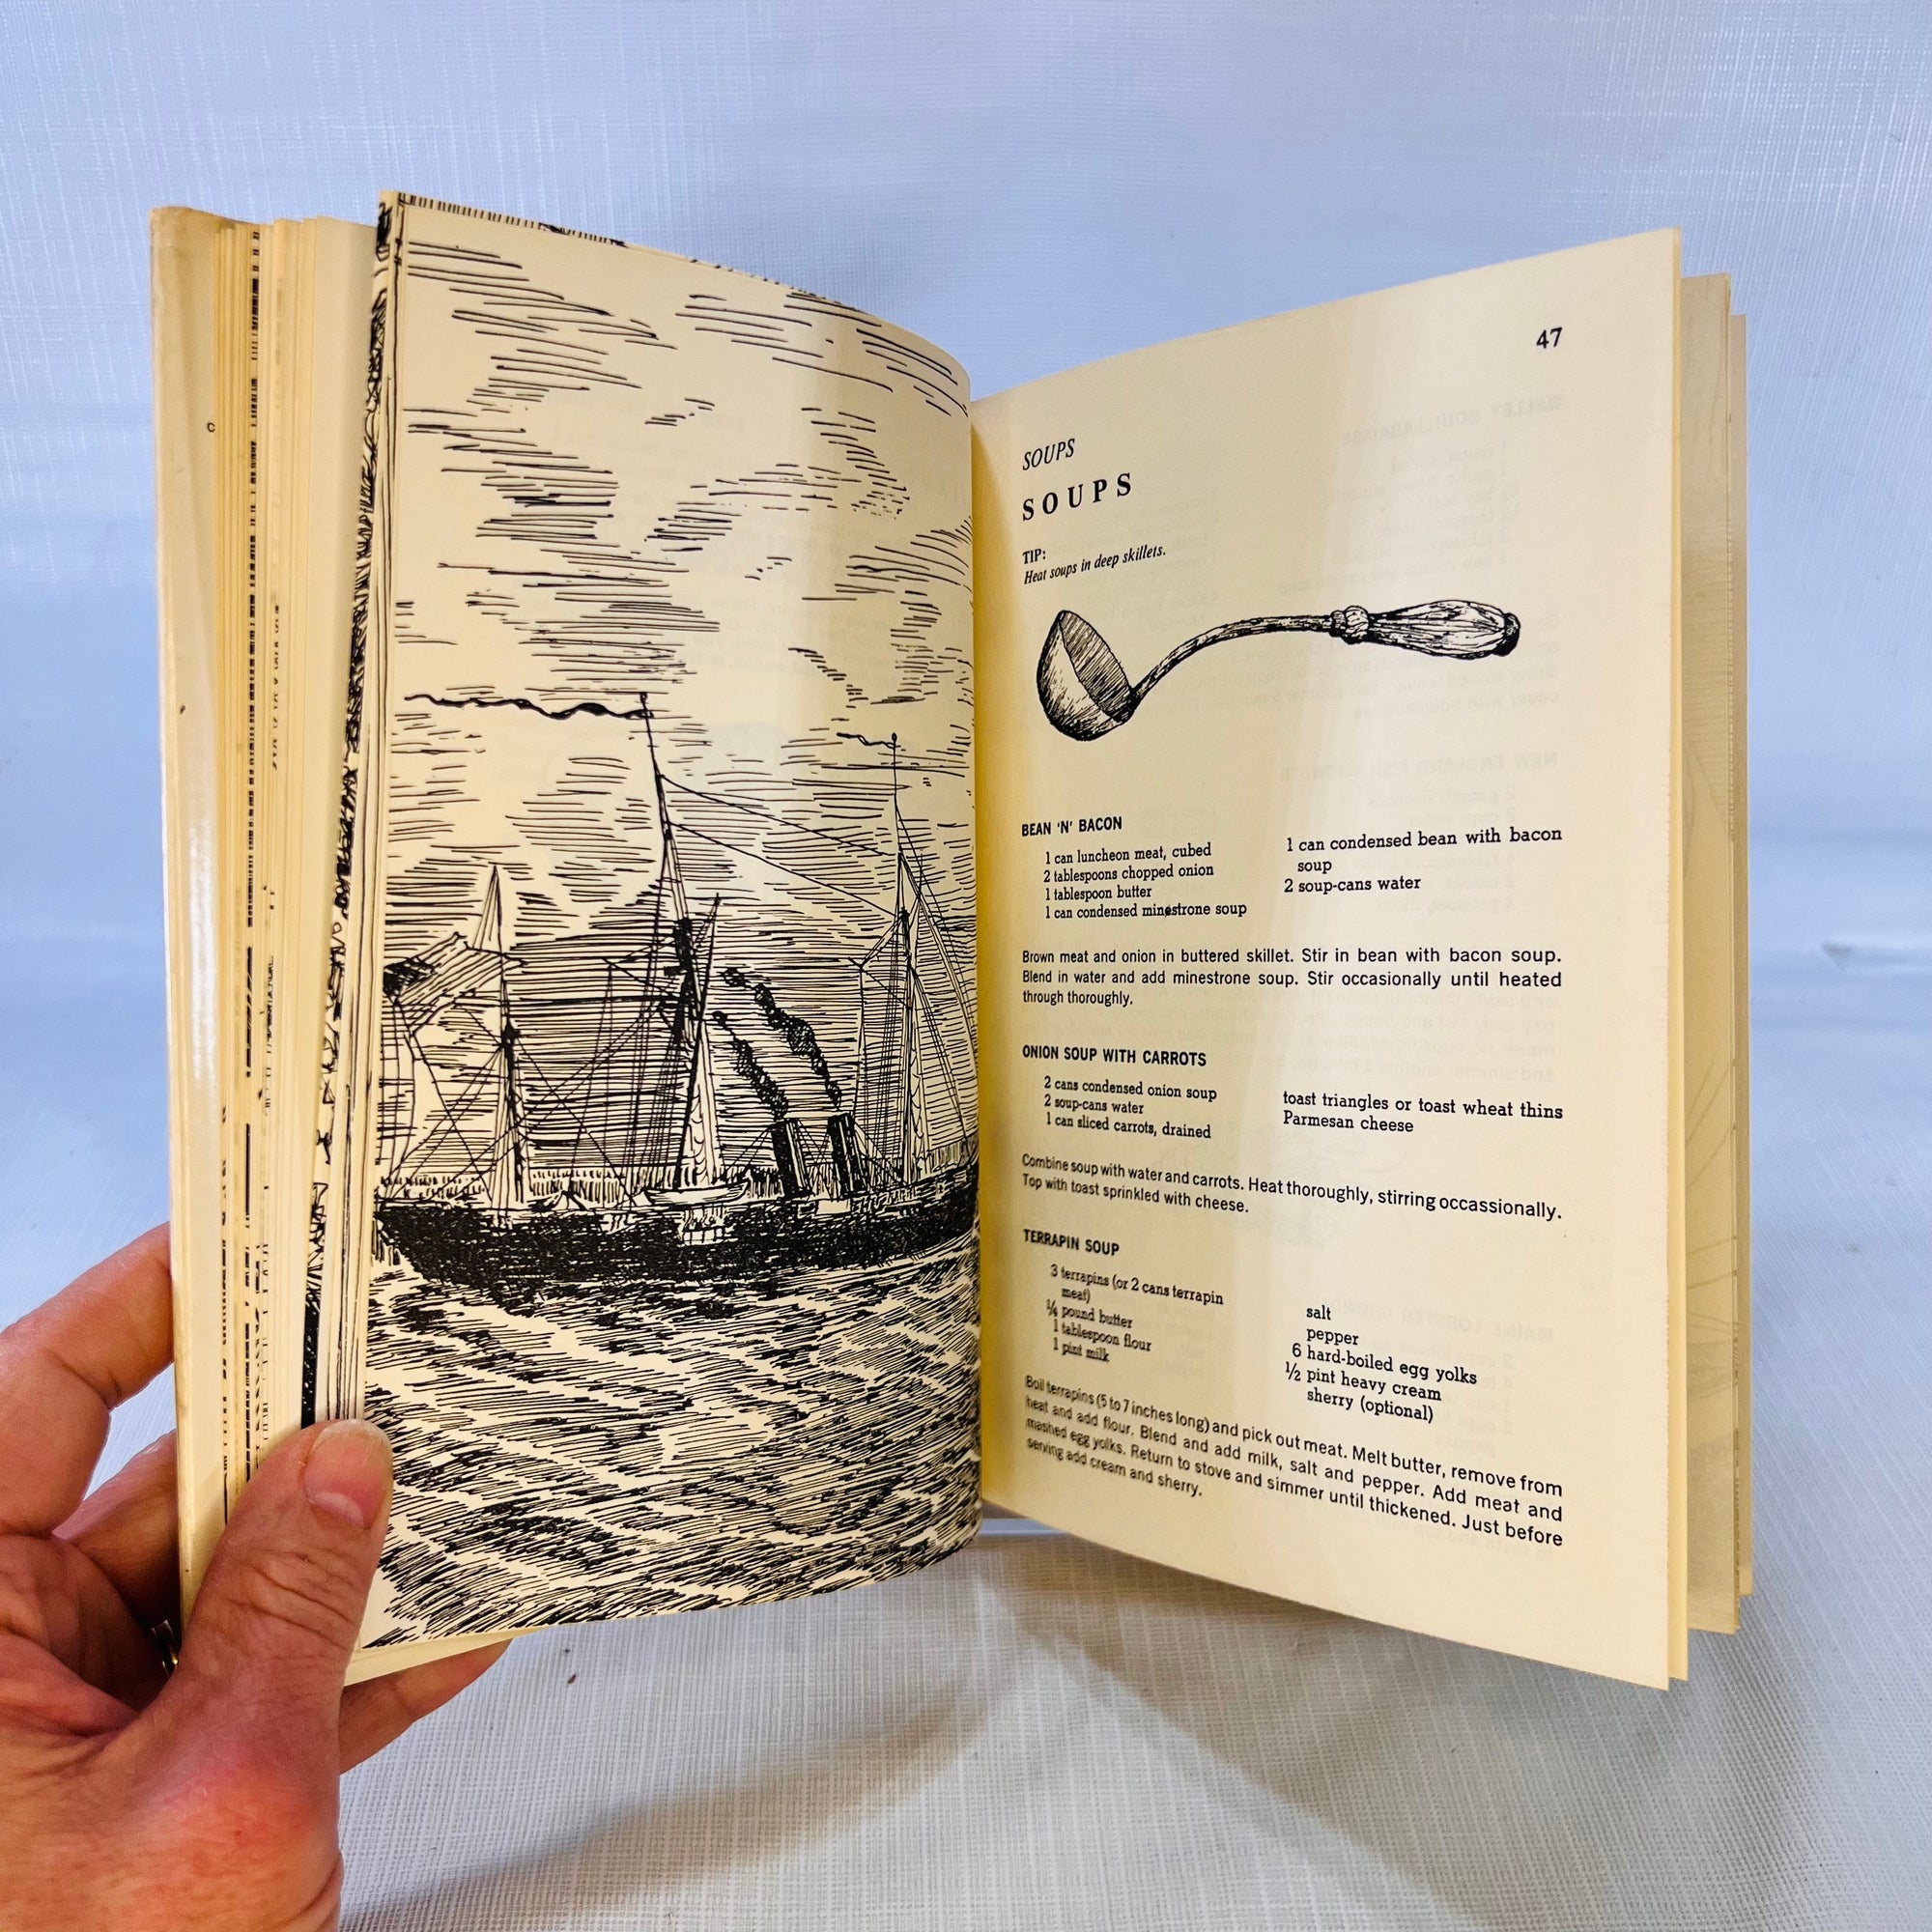 The Mariner's Cookbook or How to Cook on a Boat and Enjoy It. by Nancy Hyden Woodward 1969 Cornerstone Library,